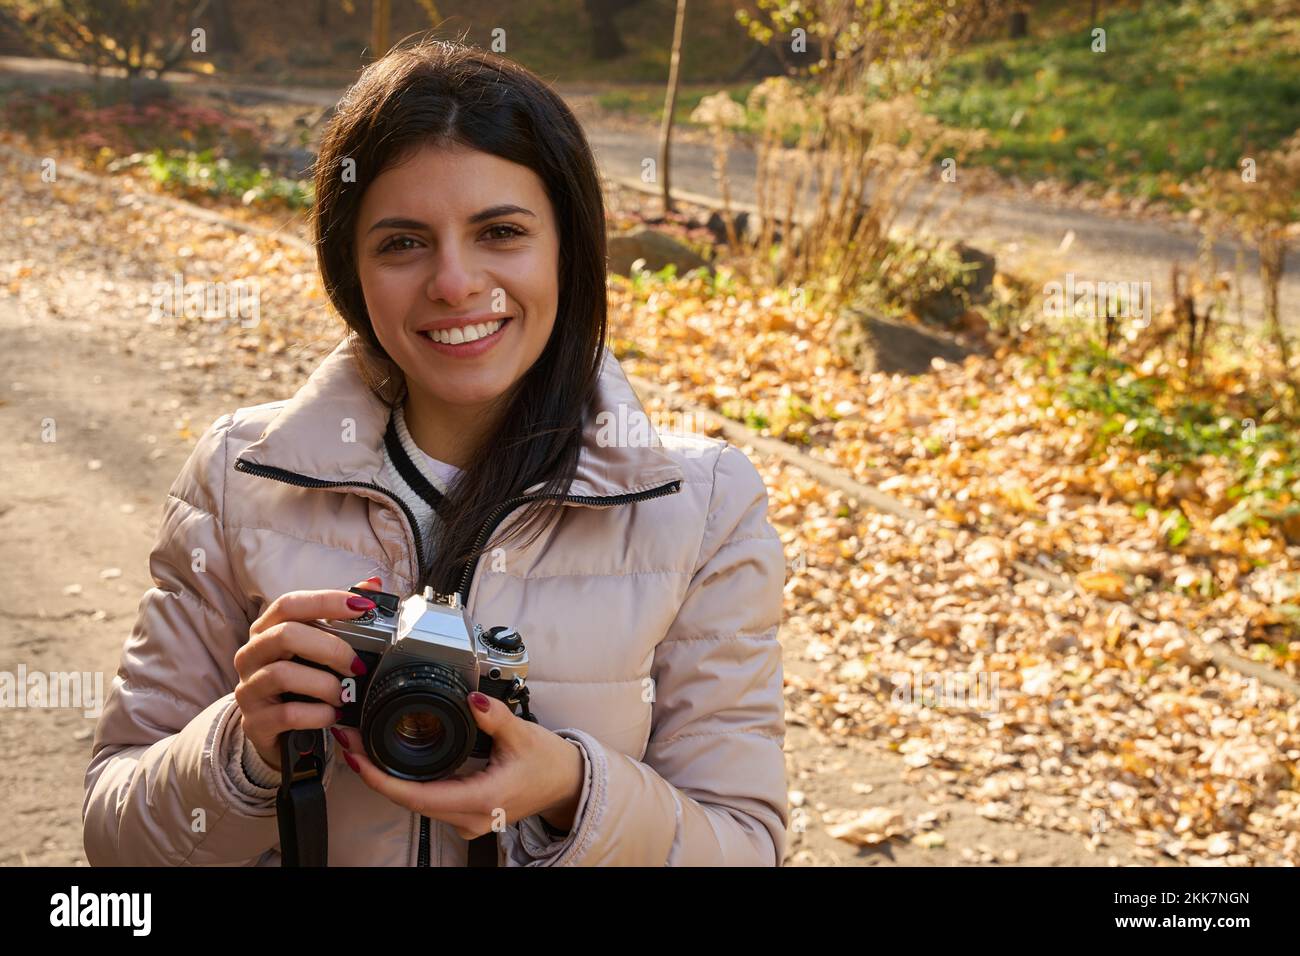 Shot of smiling young woman with camera in her hands Stock Photo